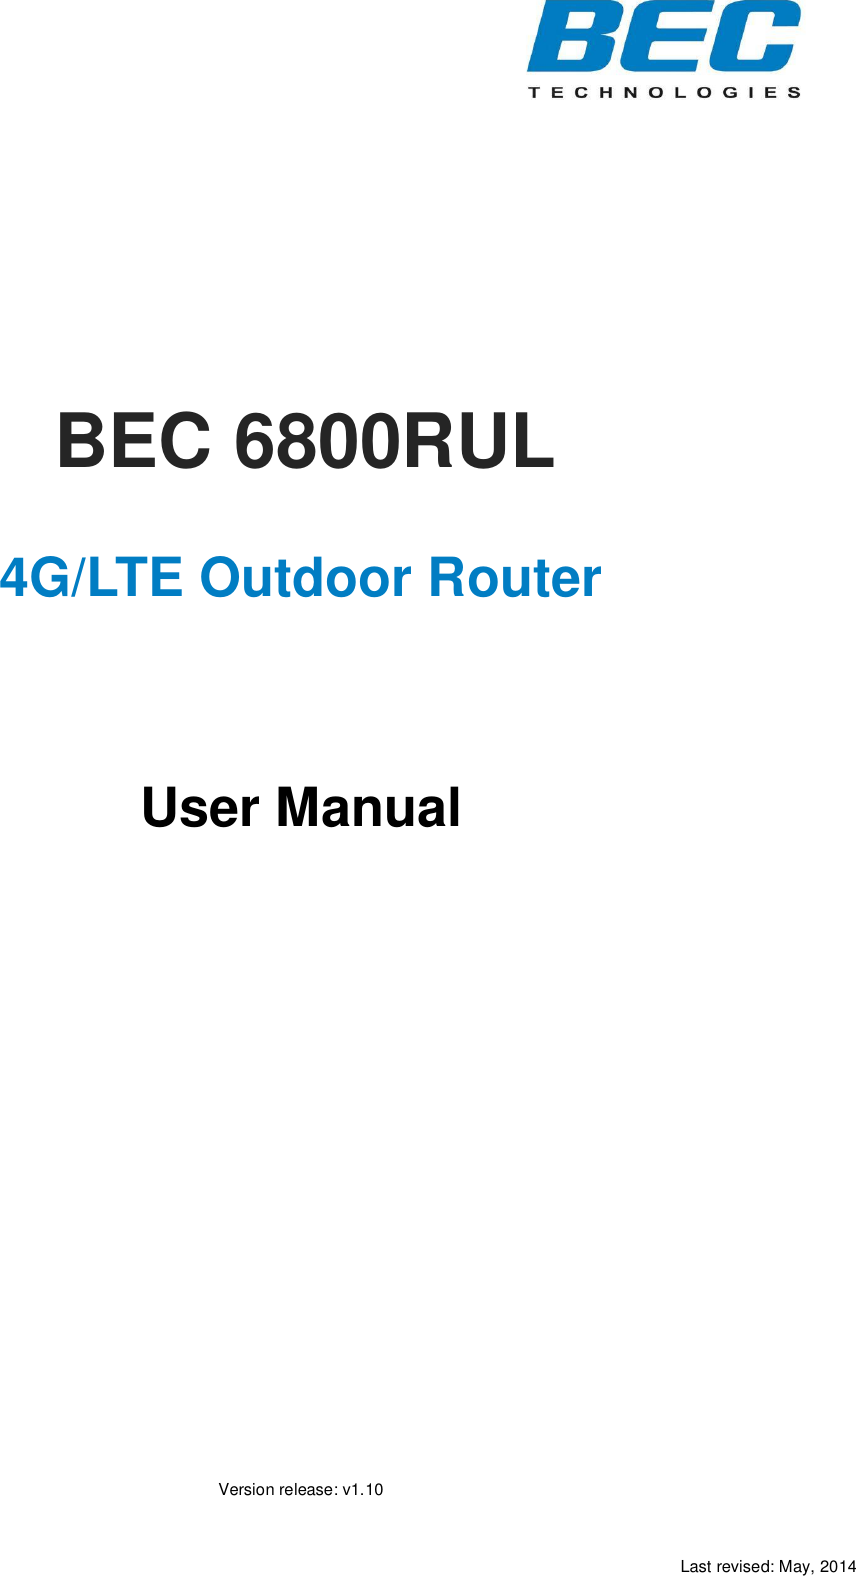 Last revised: May, 2014                  BEC 6800RUL  4G/LTE Outdoor Router         User Manual           Version release: v1.10 